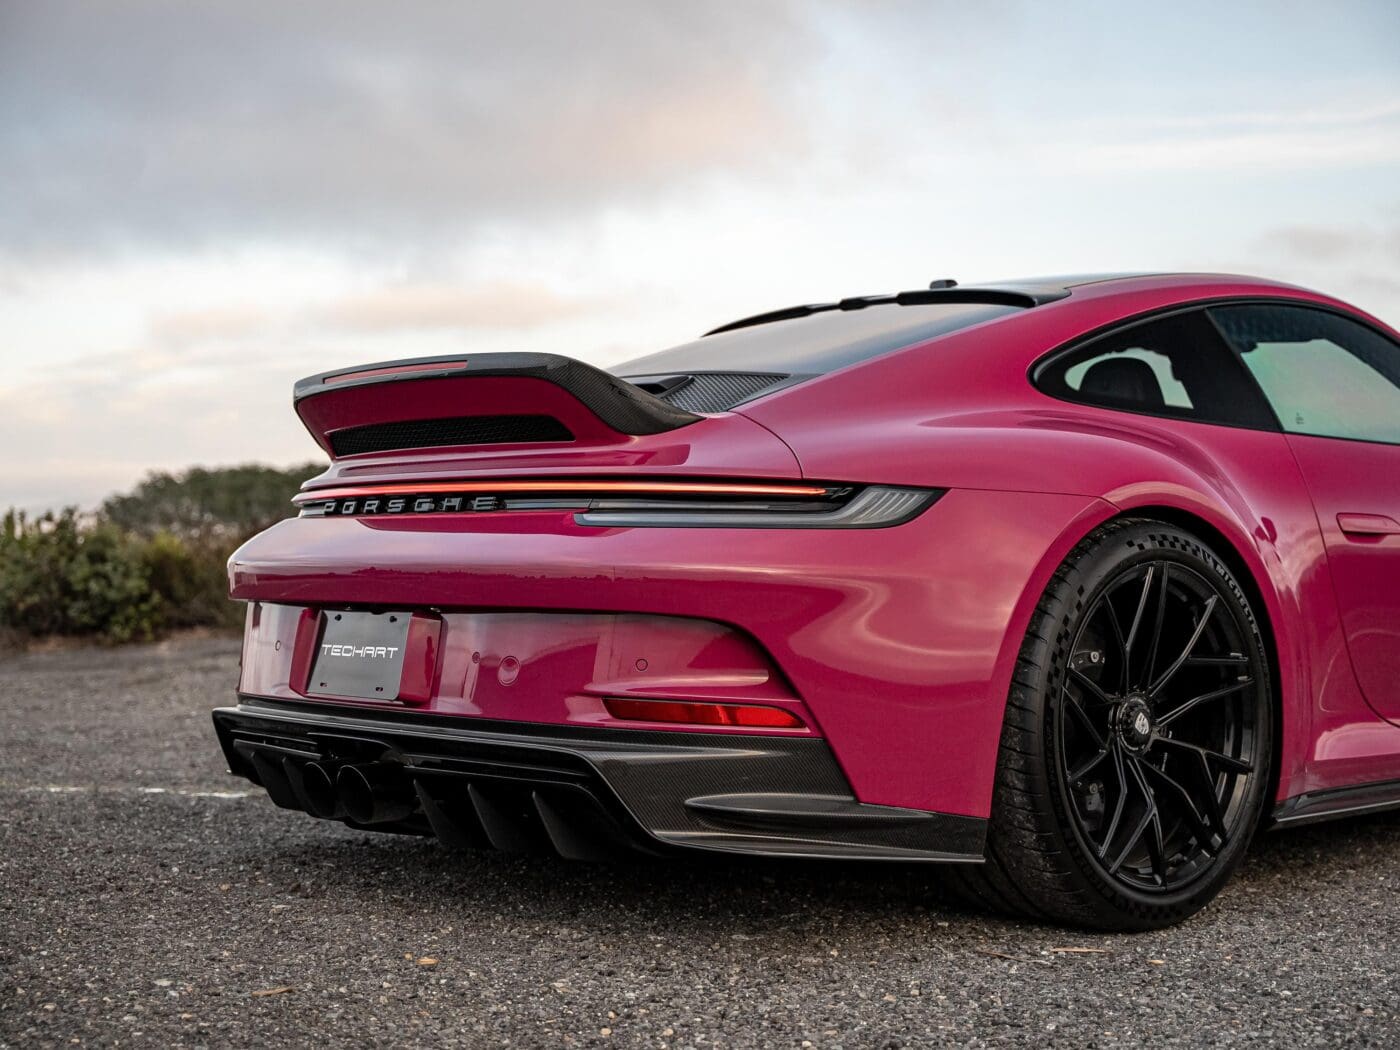 TECHART Debuts A New Carbon Rear Spoiler For 911 Carrera And 911 GT3  Touring Models